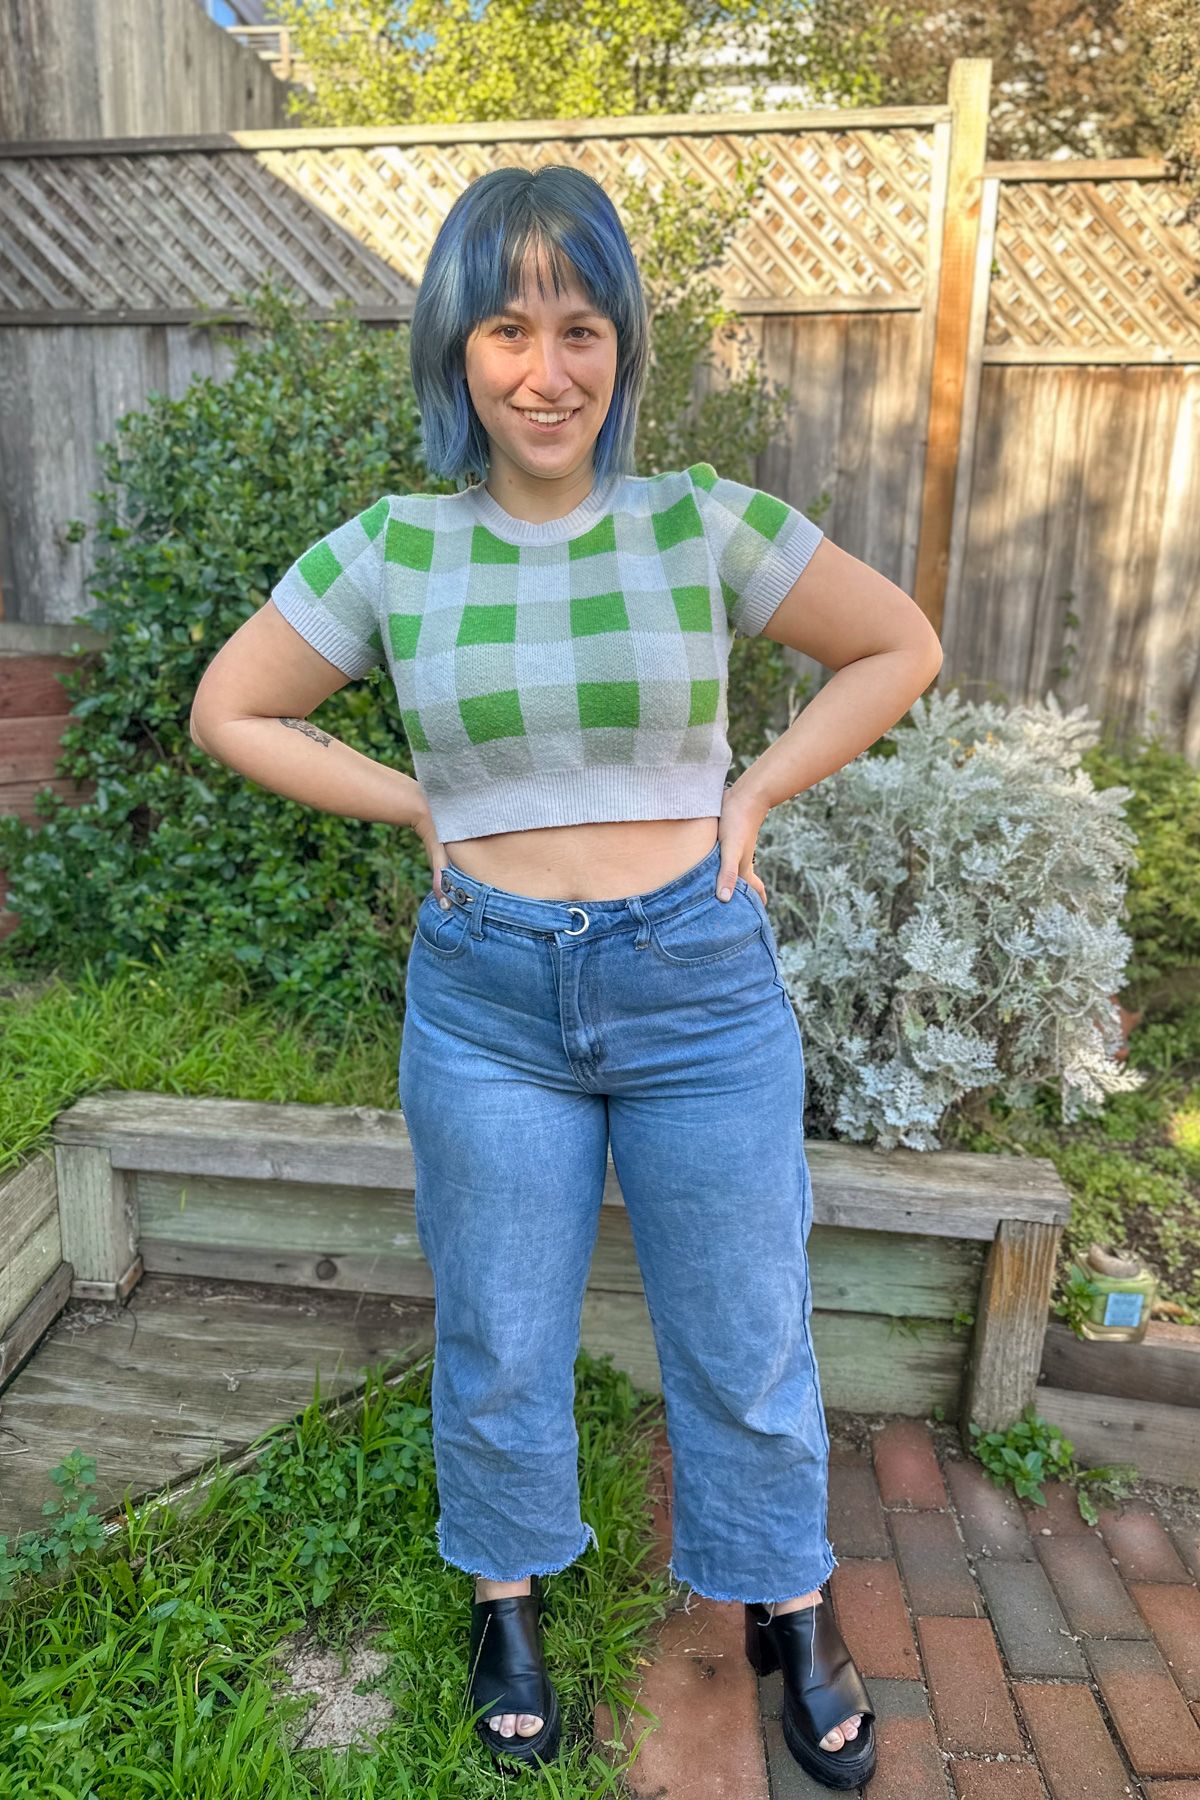 A blue-haired woman wearing a cropped, green and whiter checkered sweater and jeans stands with her hands on her hips on a brick patio next to a patch of grass in front of a backyard fence.